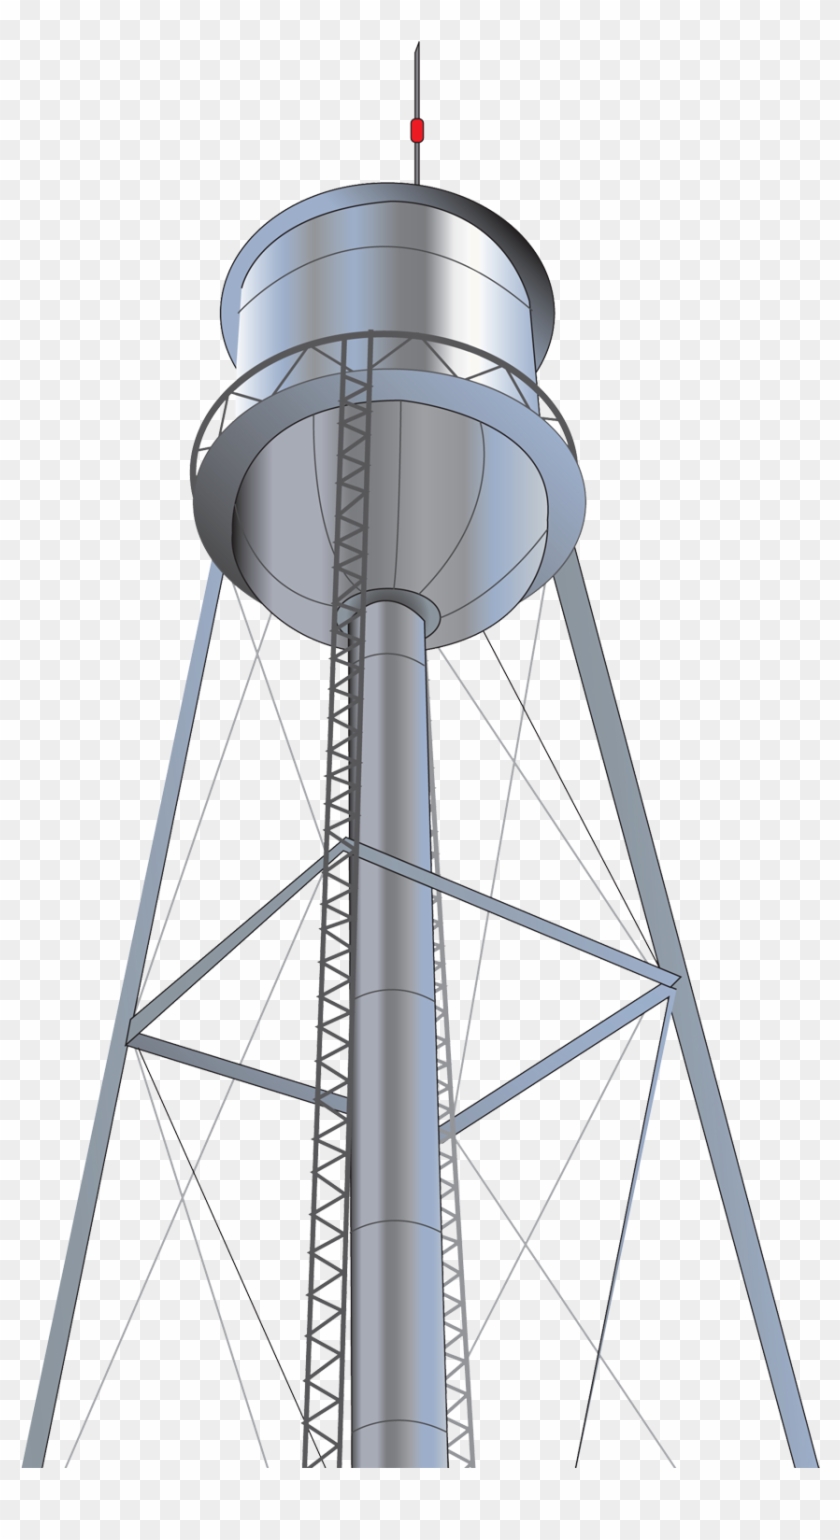 Water Tower Clip Art Eri Doodle Designs And Creations - Water Tower #960019